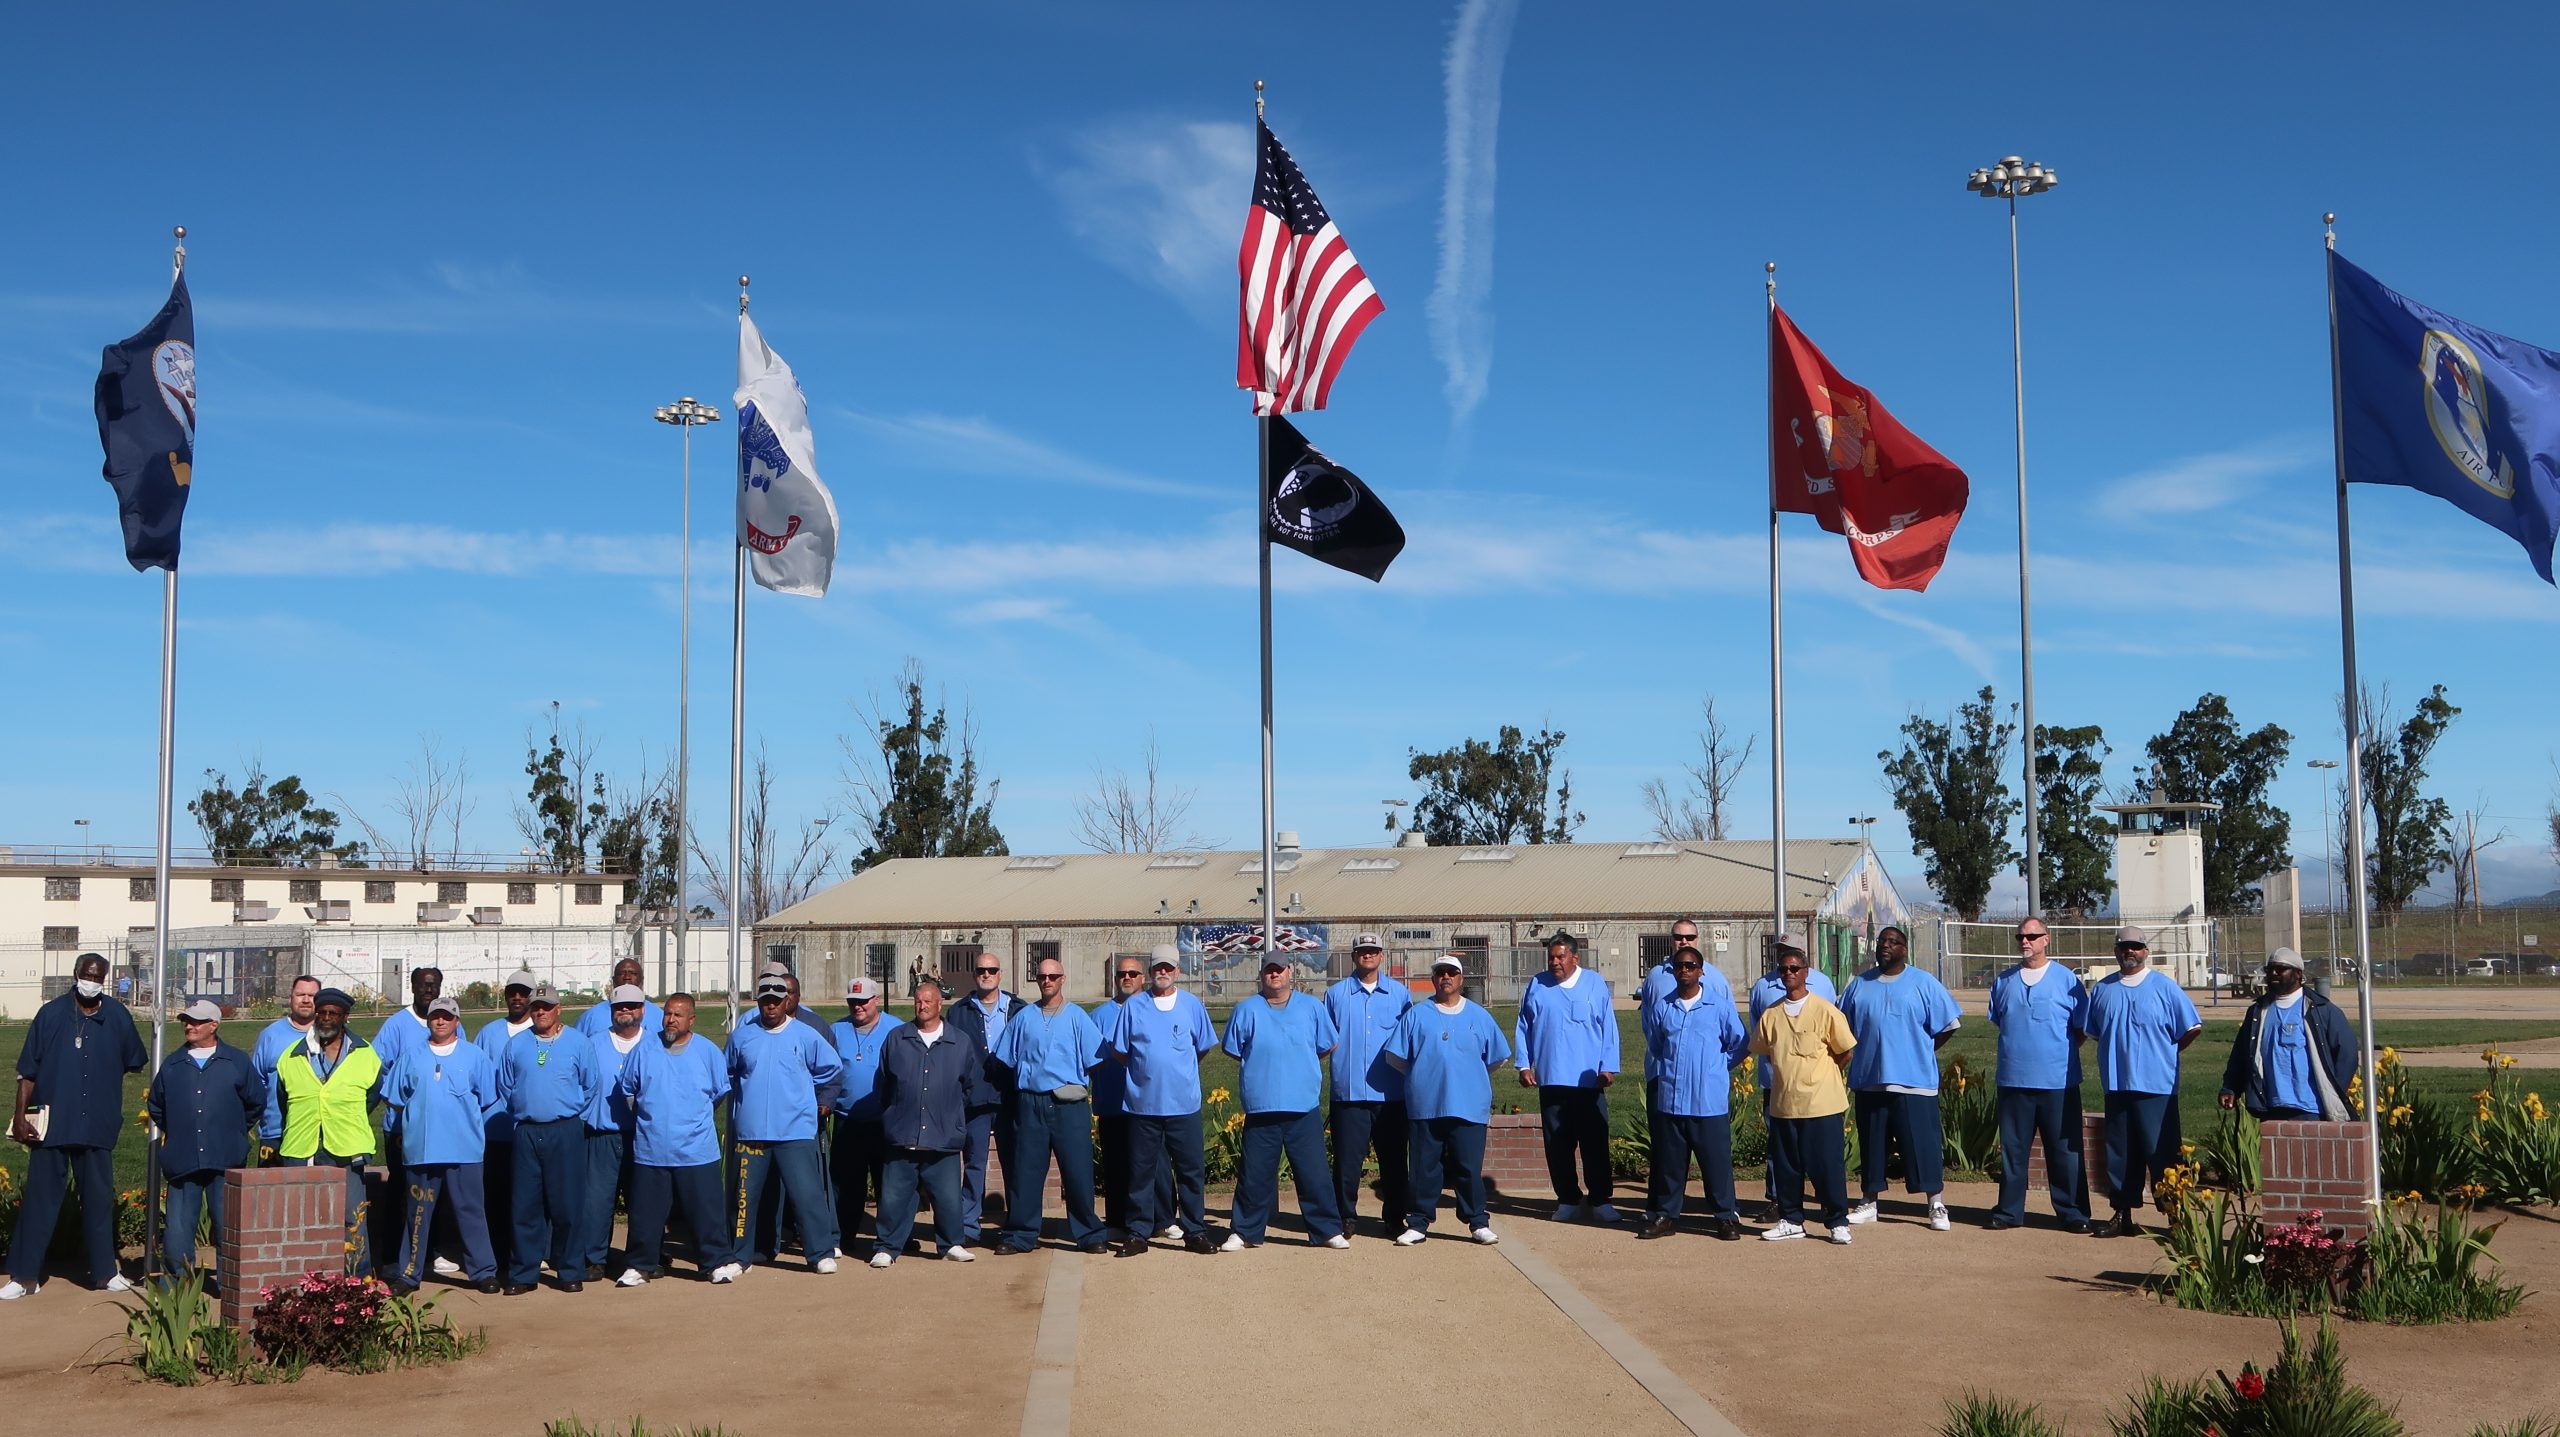 Incarcerated veteran s with flags at Correctional Training Facility (CTF) as part of Compassion Prison Project.